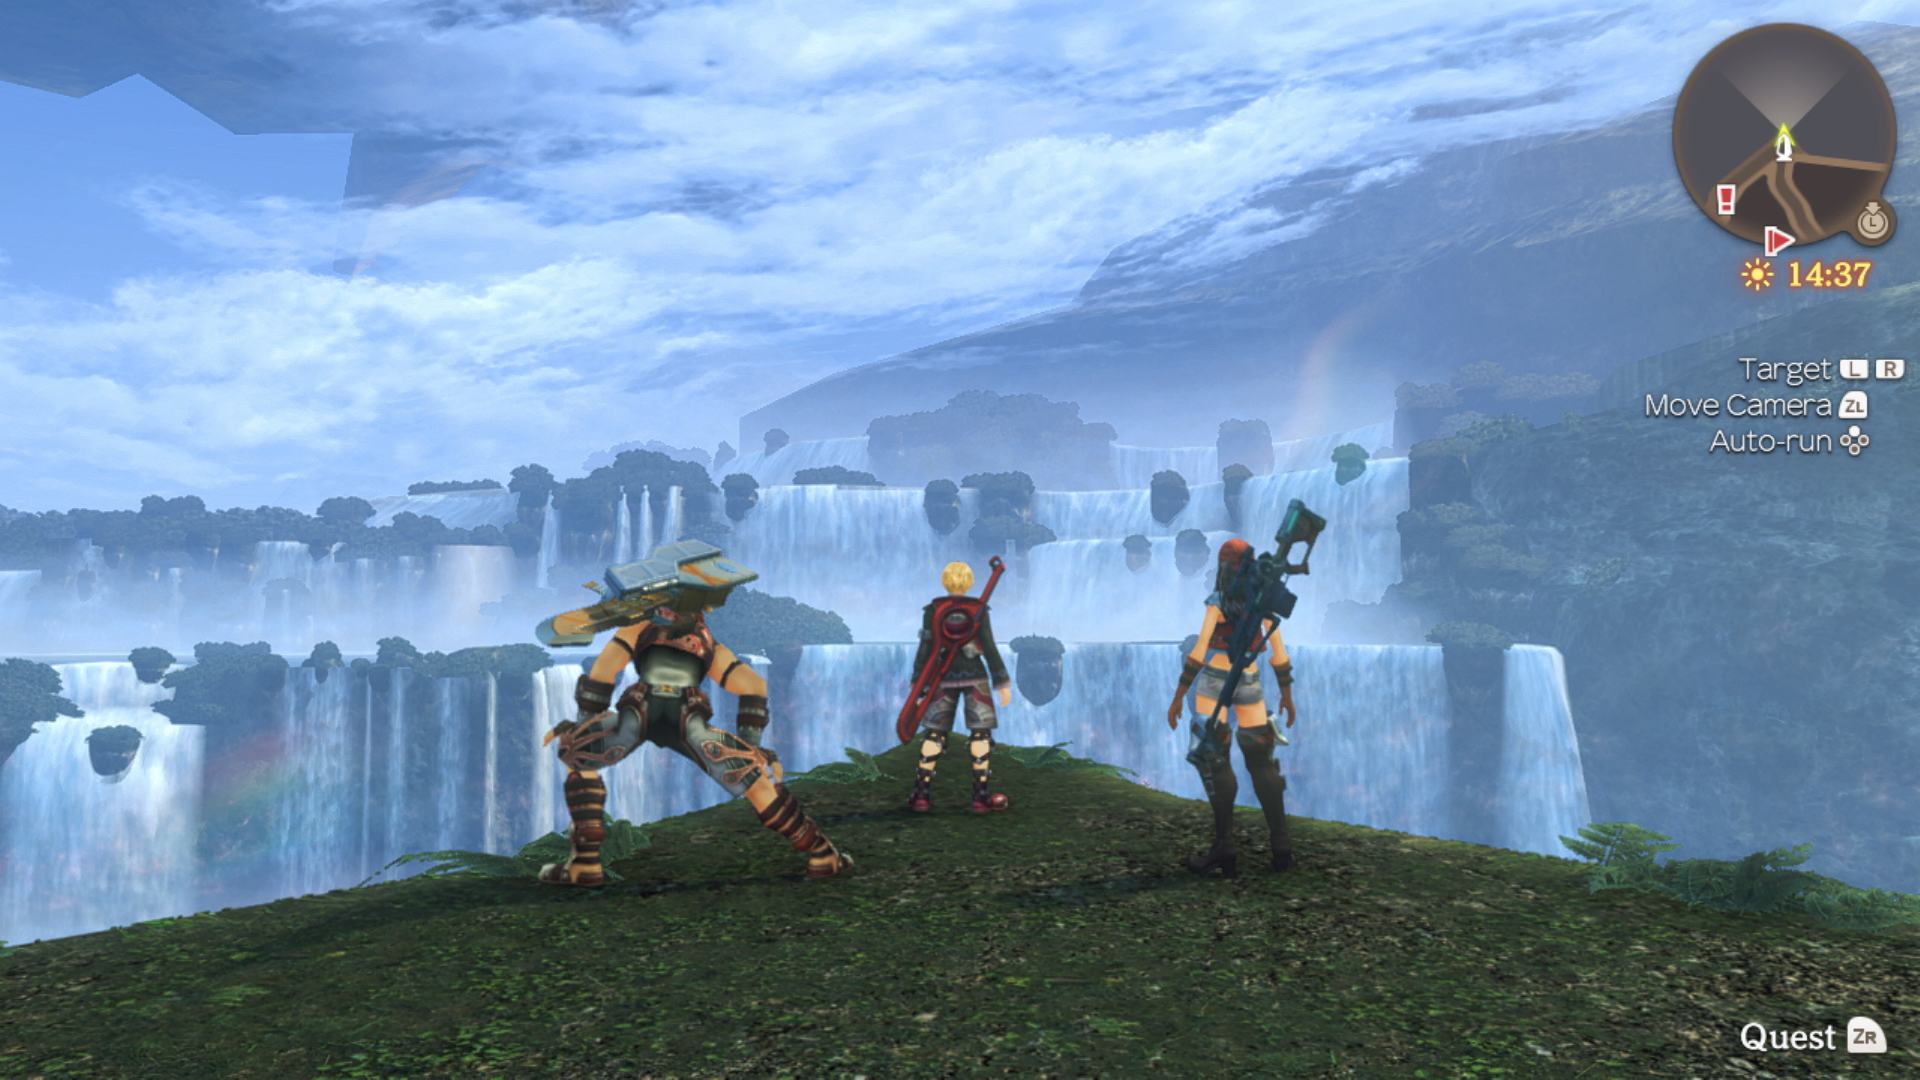 xenoblade-chronicles-definitive-edition-10-tips-for-beginners-godisageek